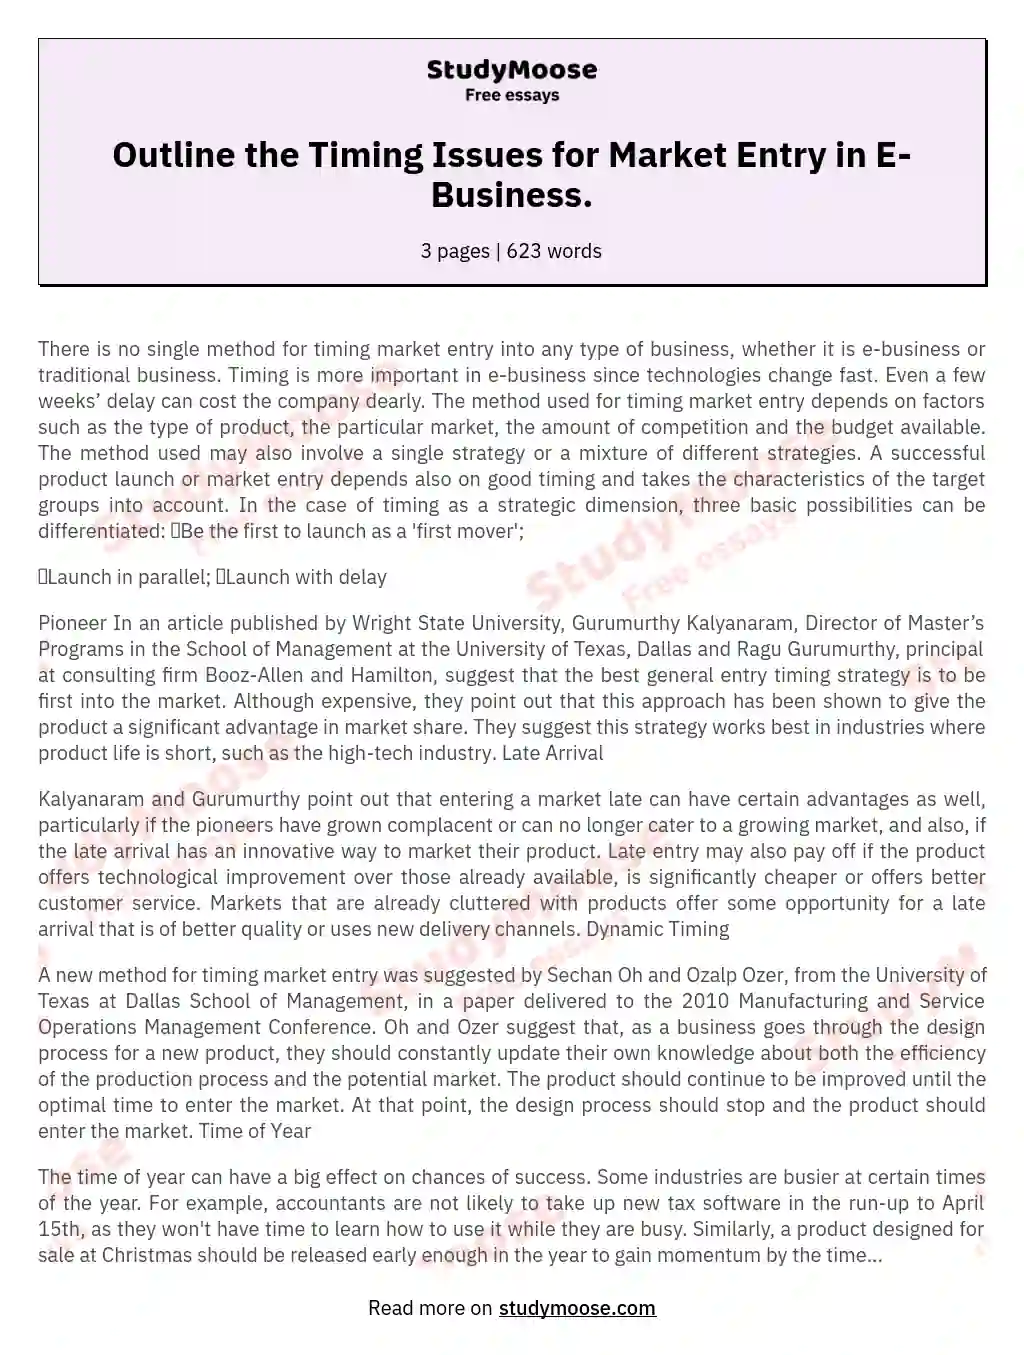 Outline the Timing Issues for Market Entry in E-Business. essay